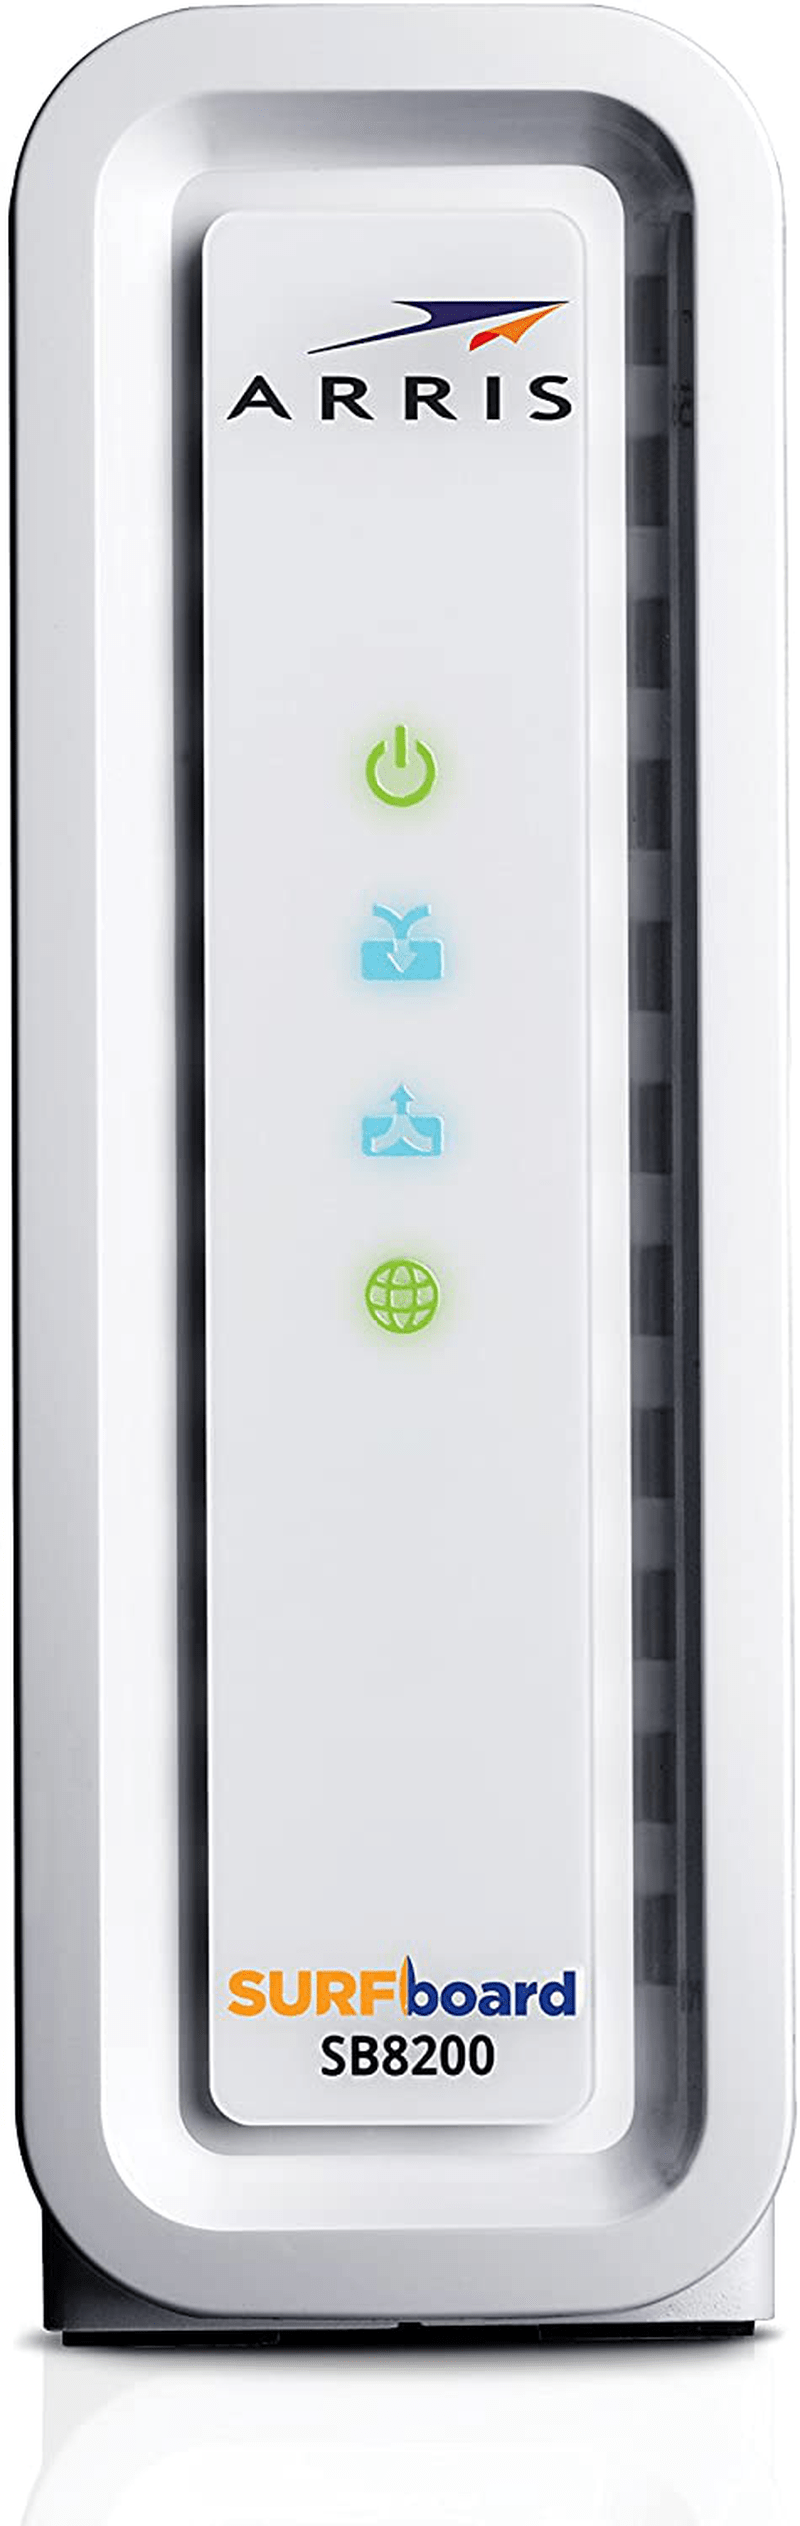 ARRIS SURFboard SB8200 DOCSIS 3.1 Gigabit Cable Modem, Approved for Cox, Xfinity, Spectrum & others , White , Max Internet Speed Plan 2000 Mbps Electronics > Networking > Modems ARRIS   